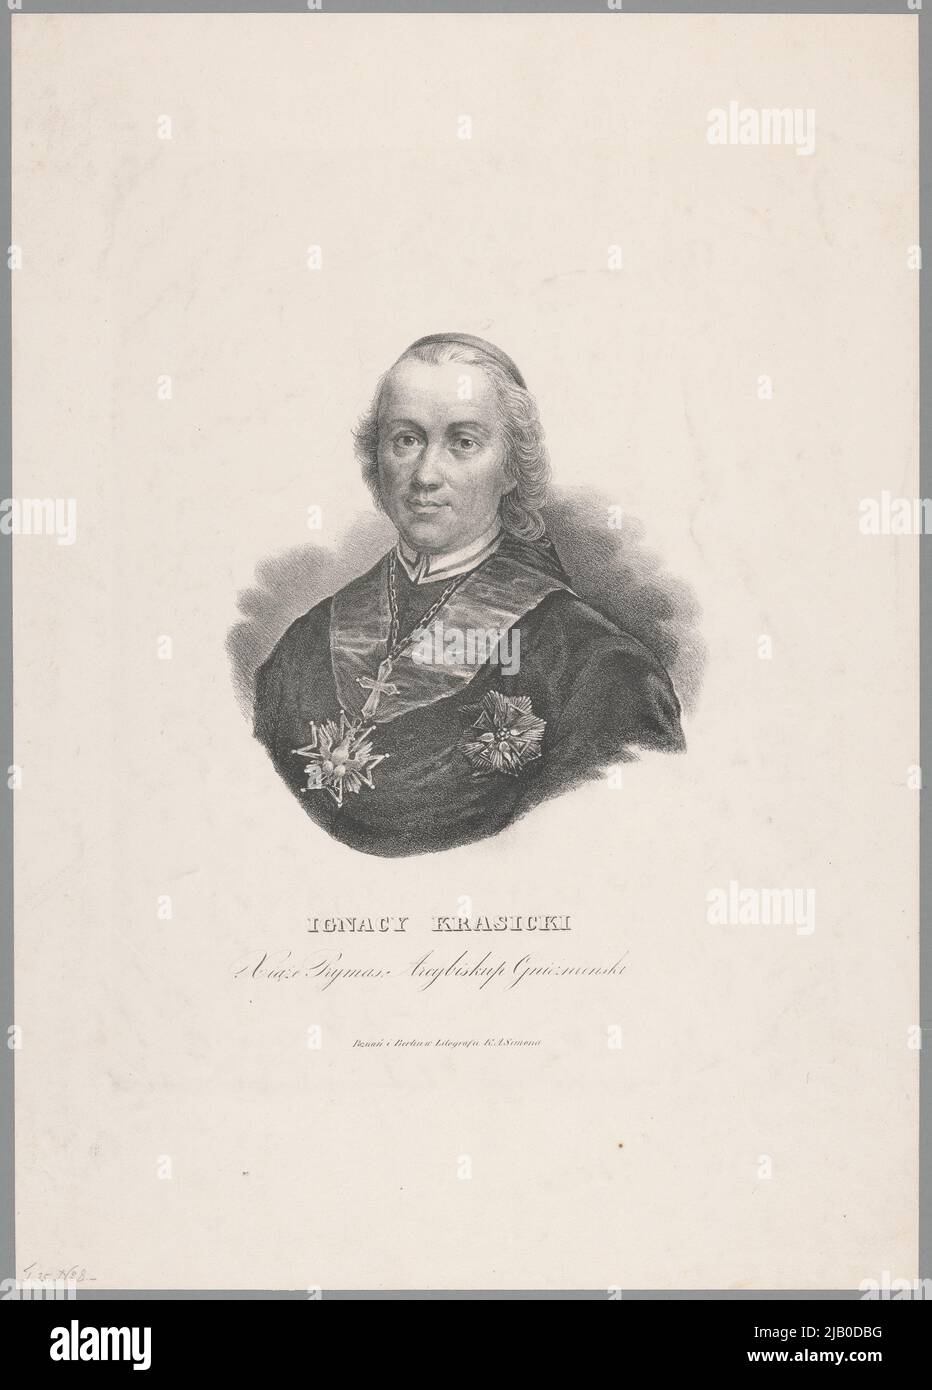 Ignacy Krasicki (1735 Dubiecko  1801 Berlin) of the Rogala coat of arms  Warmian bishop in 1767 1795, Archbishop of Gniezno in 1795 1801, poet, prose writer and encyclopedist Simon, K. A., Ksi Garnia, SKREE FRIPMENT AND LITHING AND LITRABLE Stock Photo